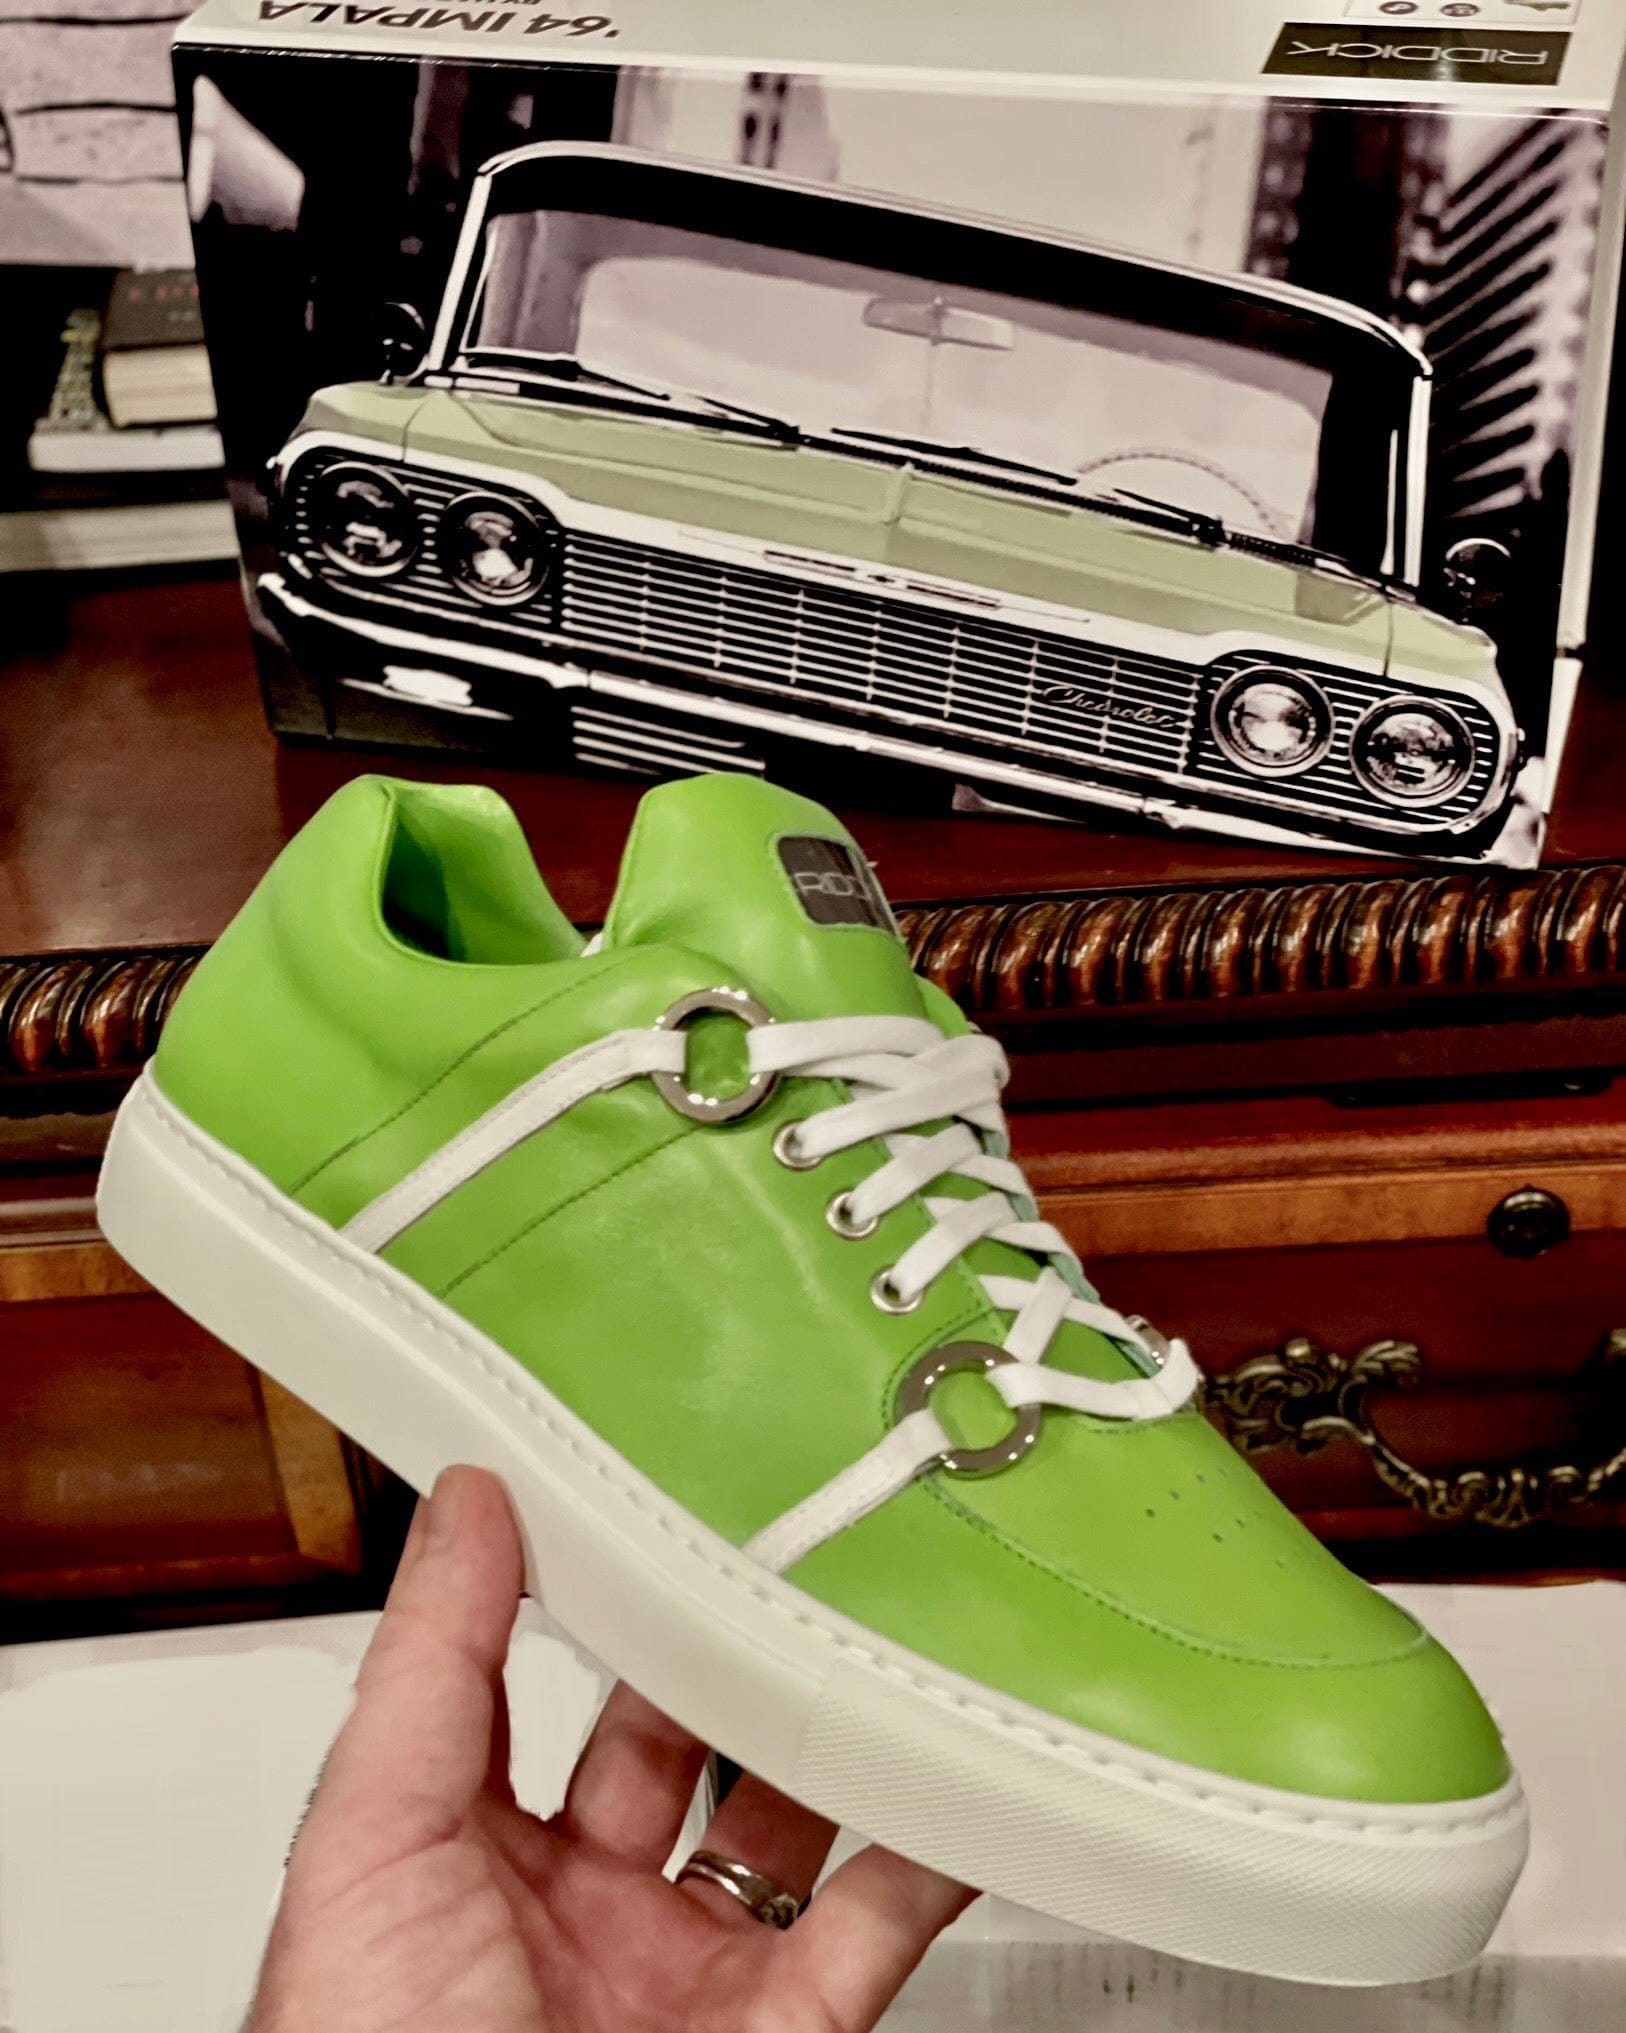 '64 IMPALA (From The 305 Collection) - Riddick Shoes Shoe Riddick Shoes   